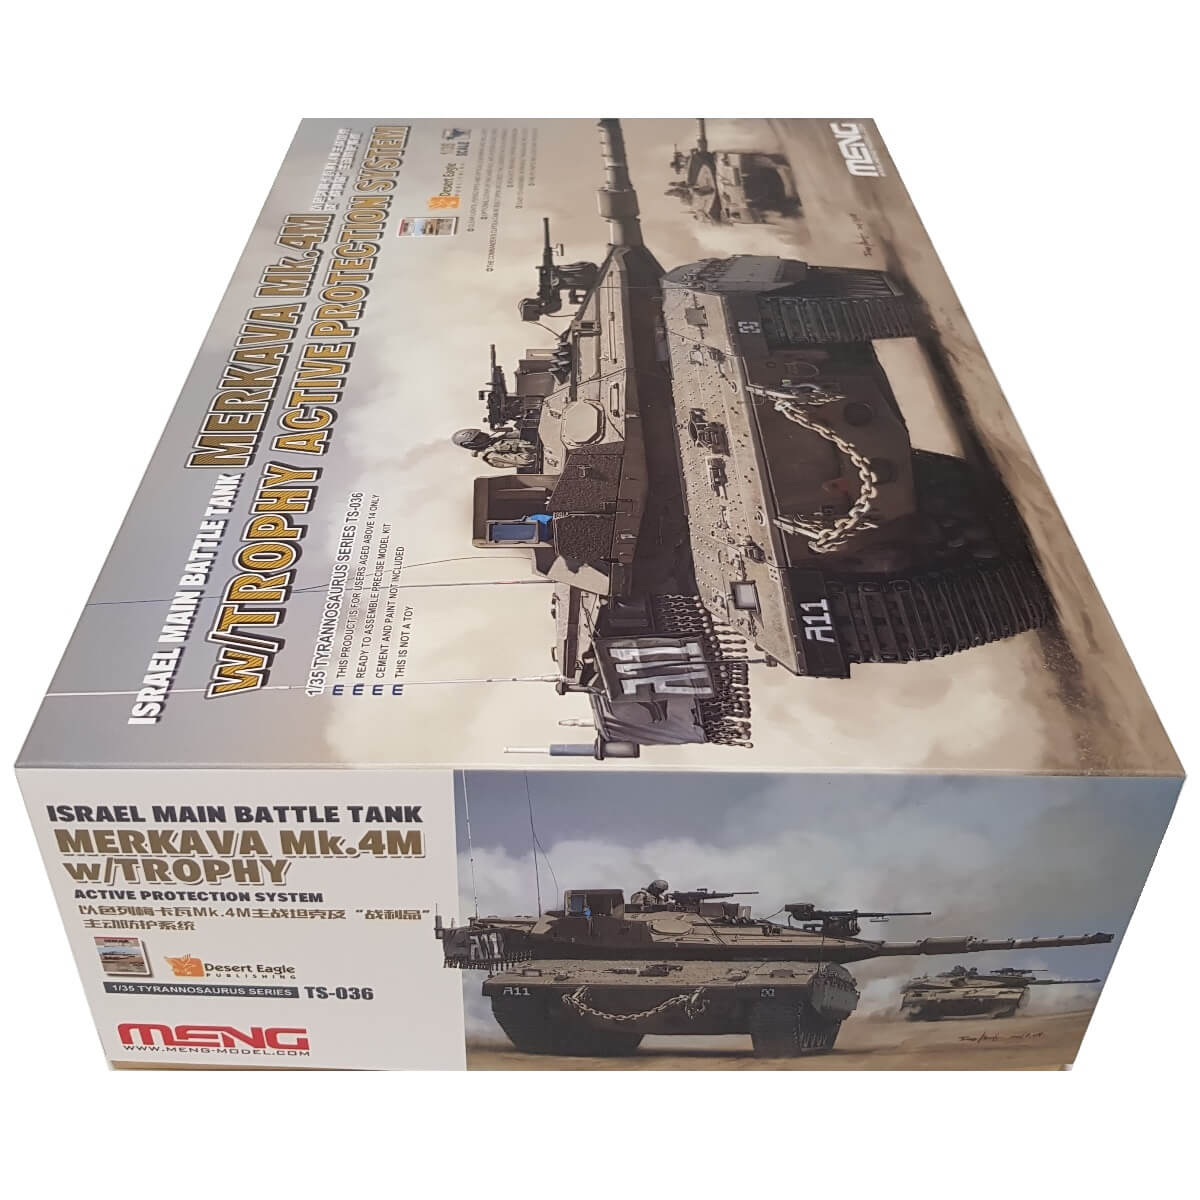 1:35 Israel Main Battle Tank Merkava Mk. 4M with TROPHY Active Protection System - MENG